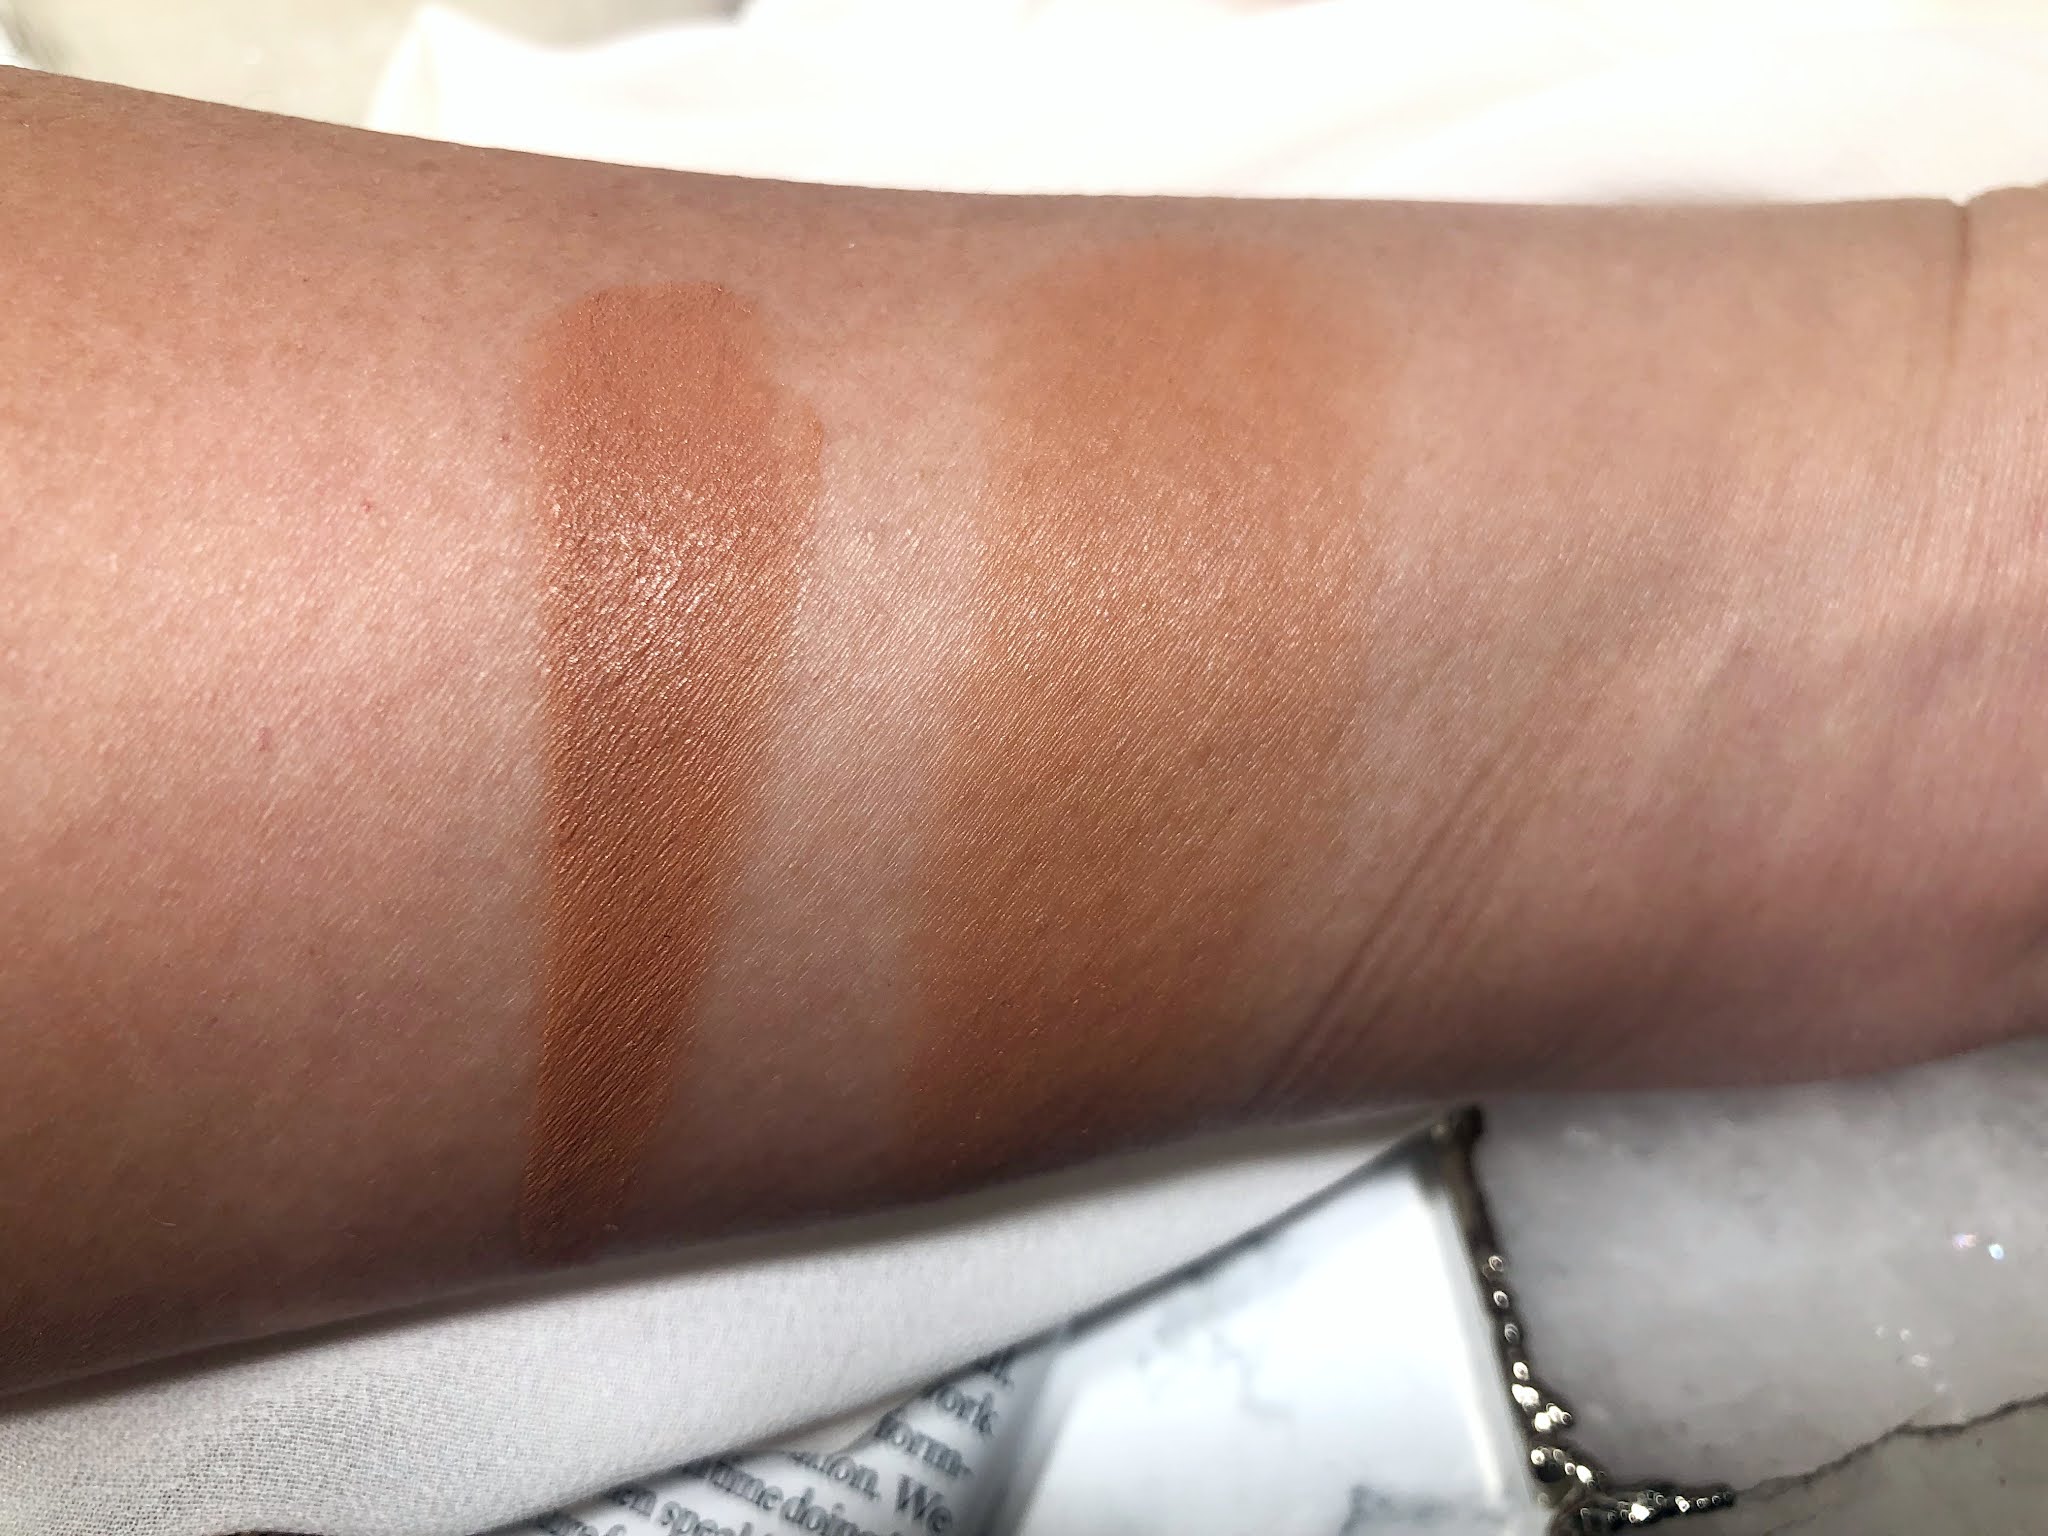 Saie Sun Melt Natural Cream Bronzer Review and Swatches